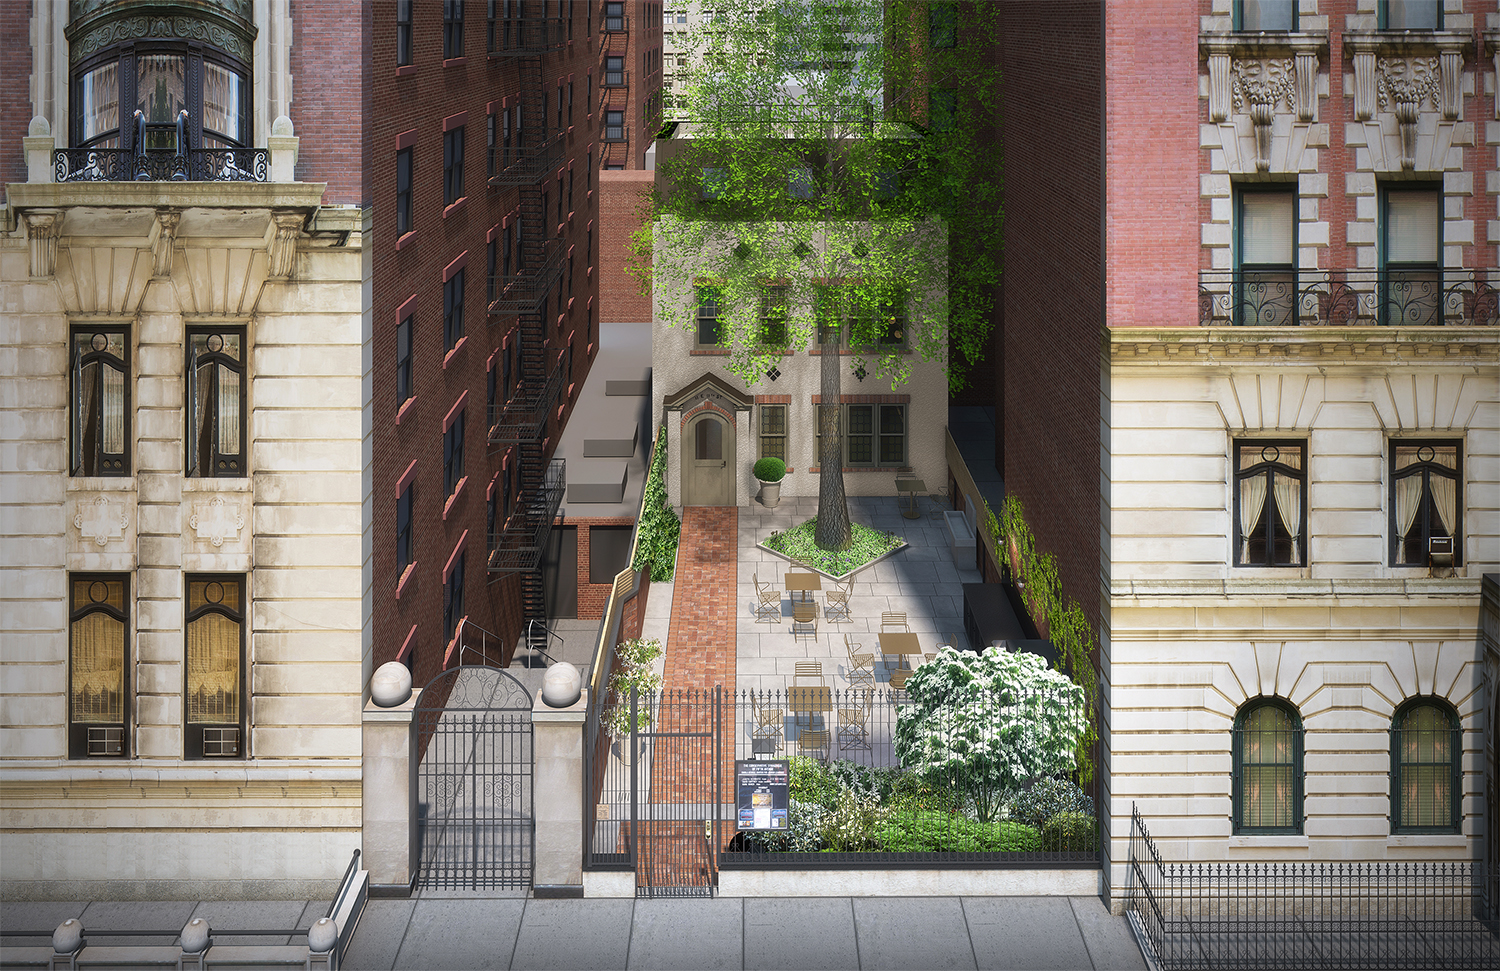 Proposed expansion of the Conservative Synagogue of Fifth Avenue, 11 East 11th Street.